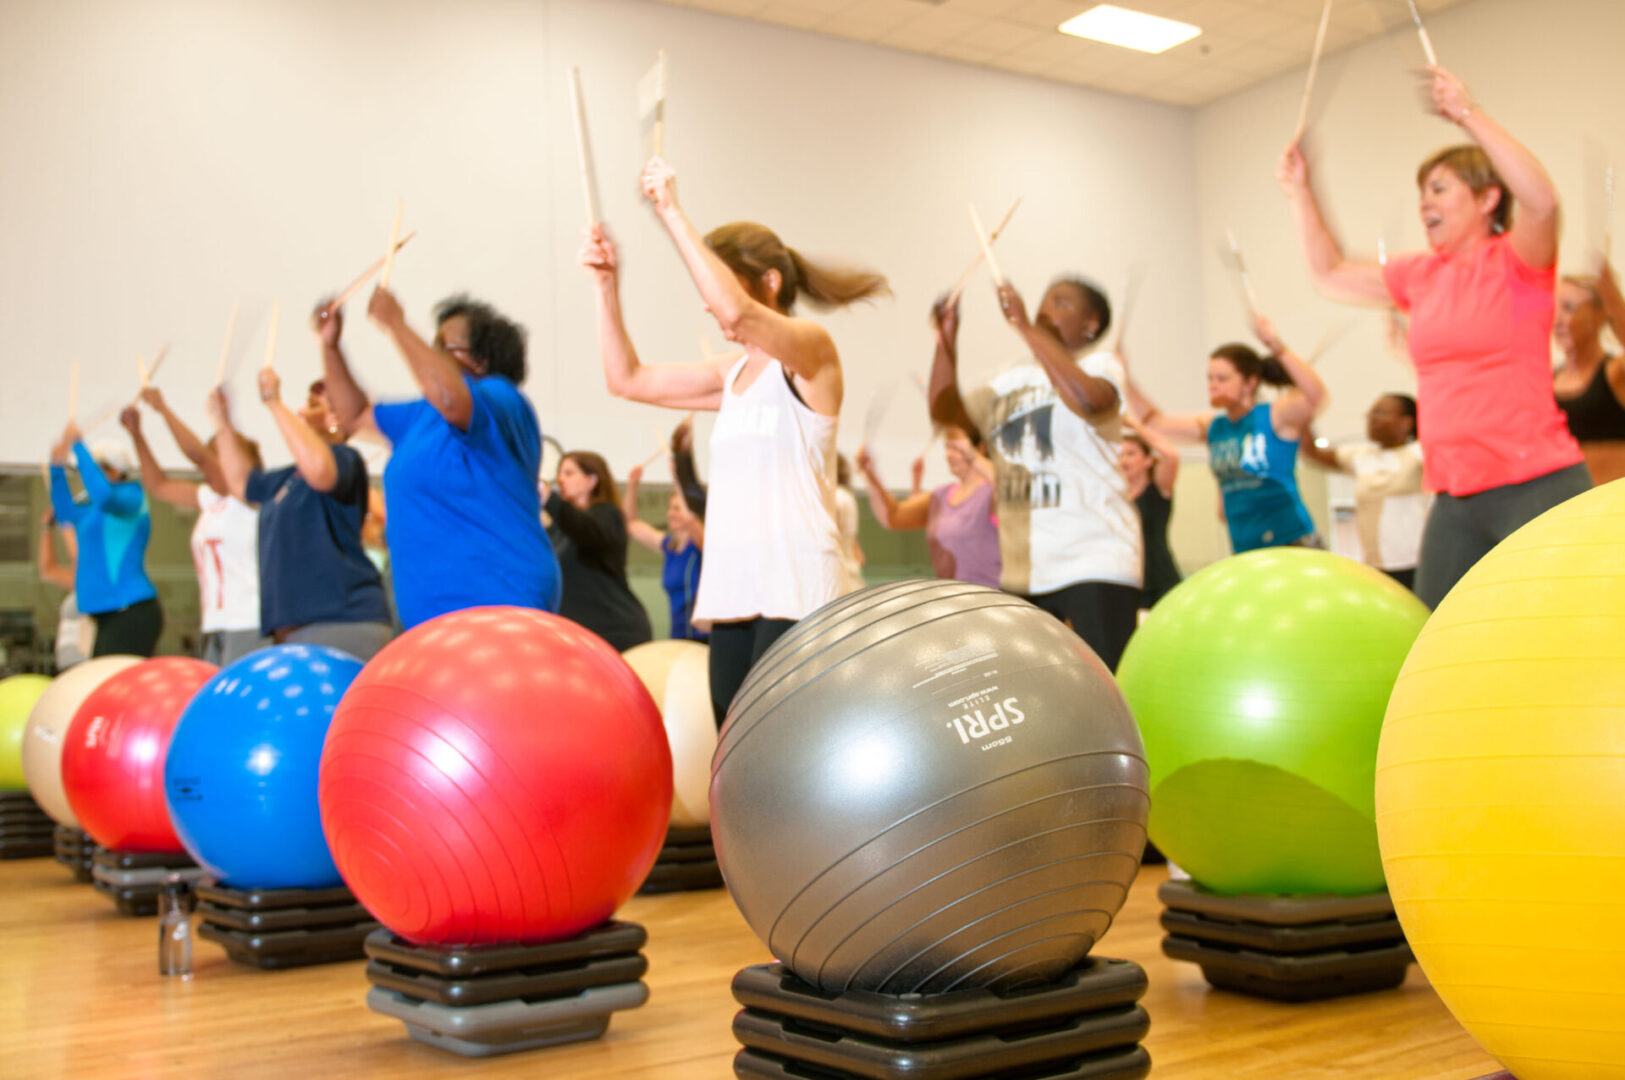 A group of people in a gym with exercise balls.